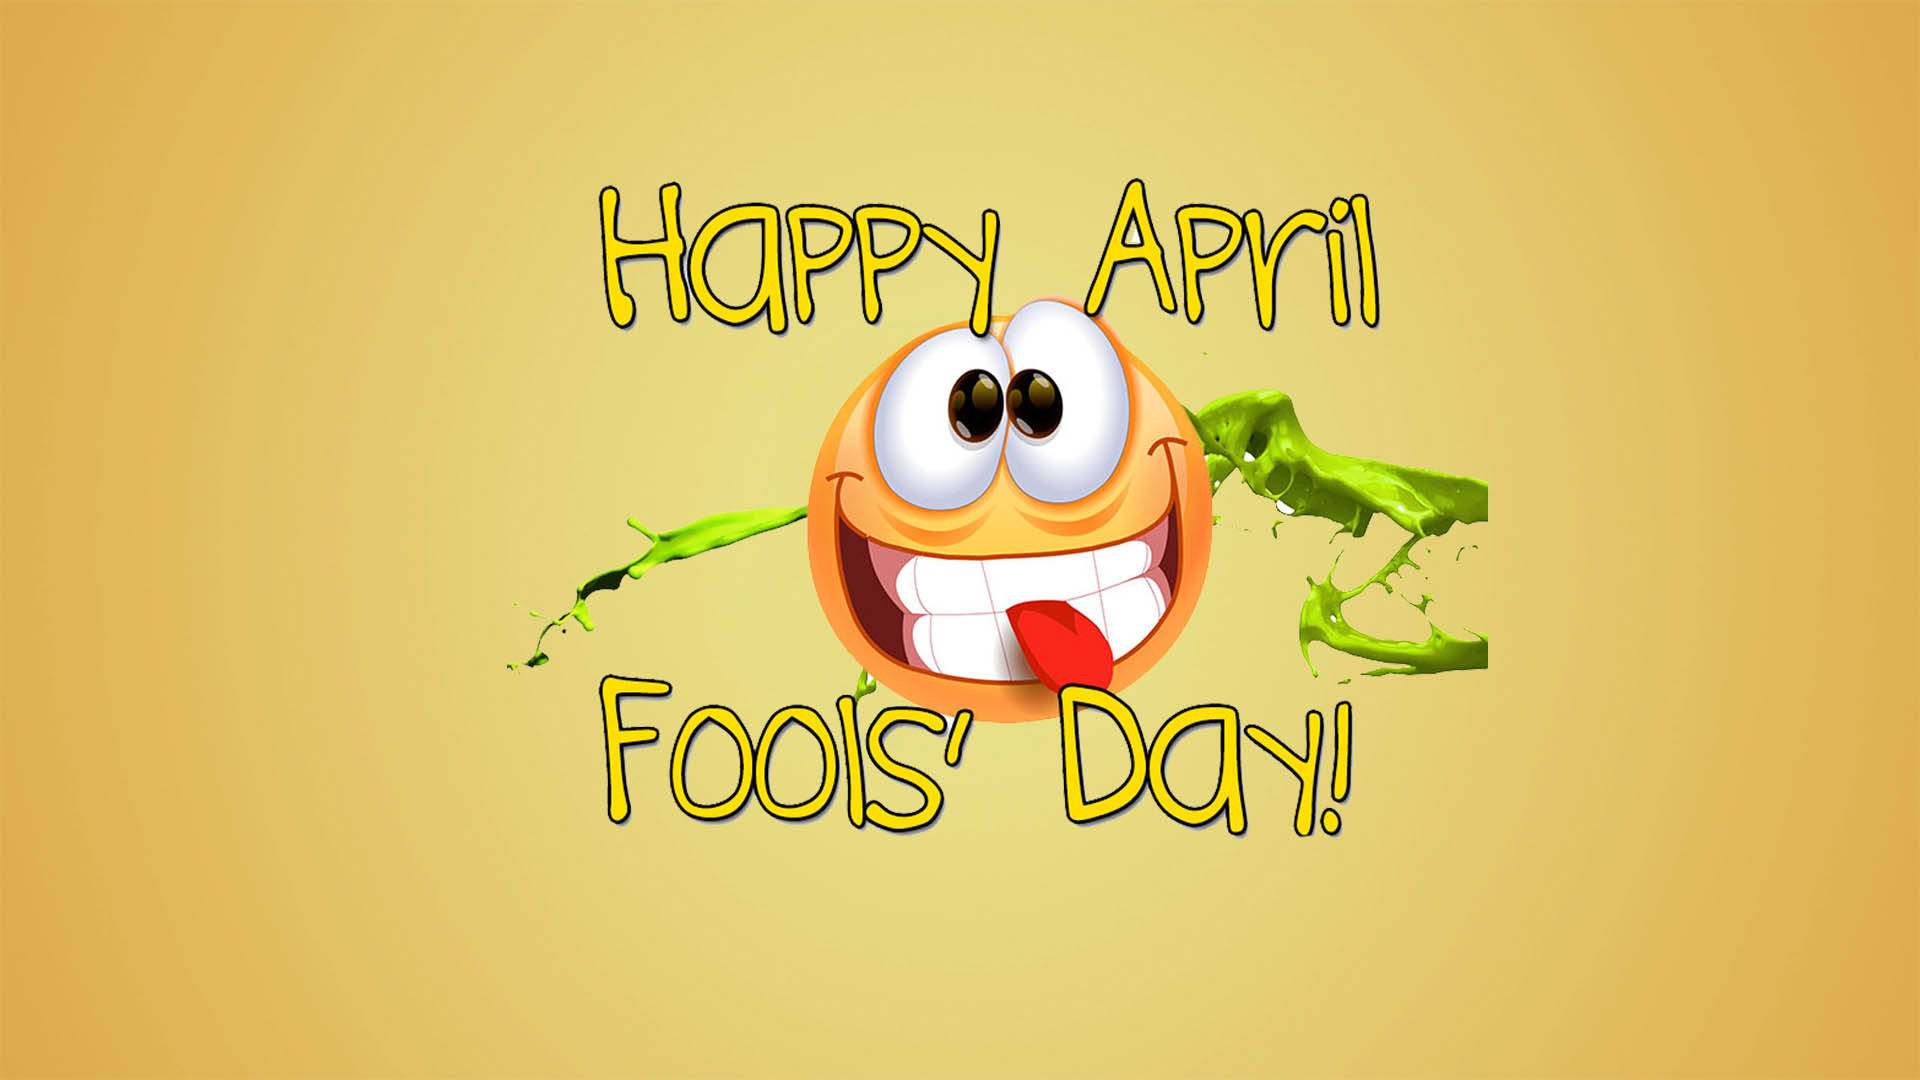 Cheeky Smiley Emoticon Enjoying April Fools' Day with Slime Pranks Wallpaper